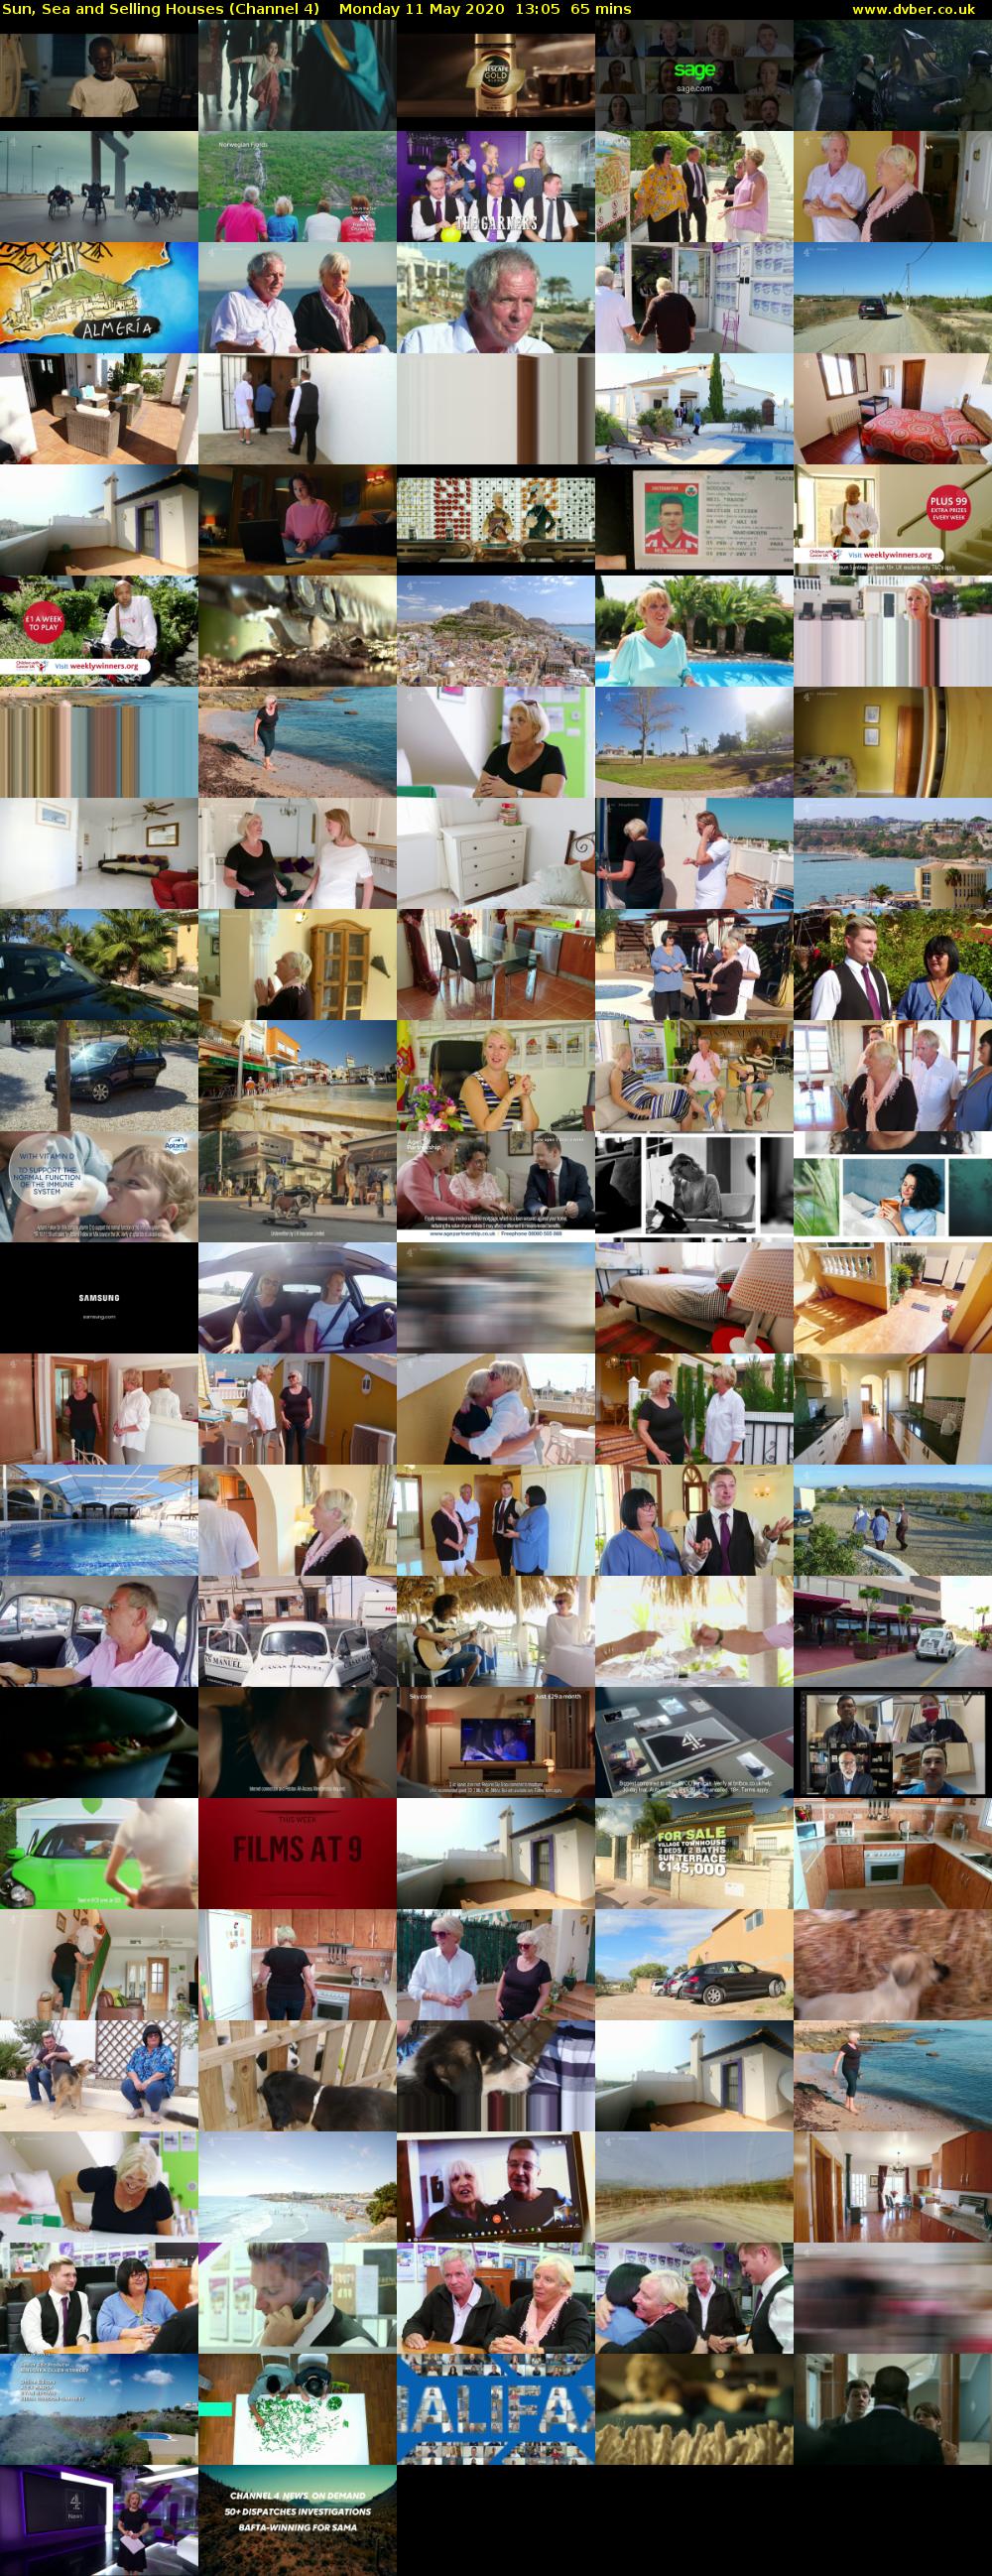 Sun, Sea and Selling Houses (Channel 4) Monday 11 May 2020 13:05 - 14:10